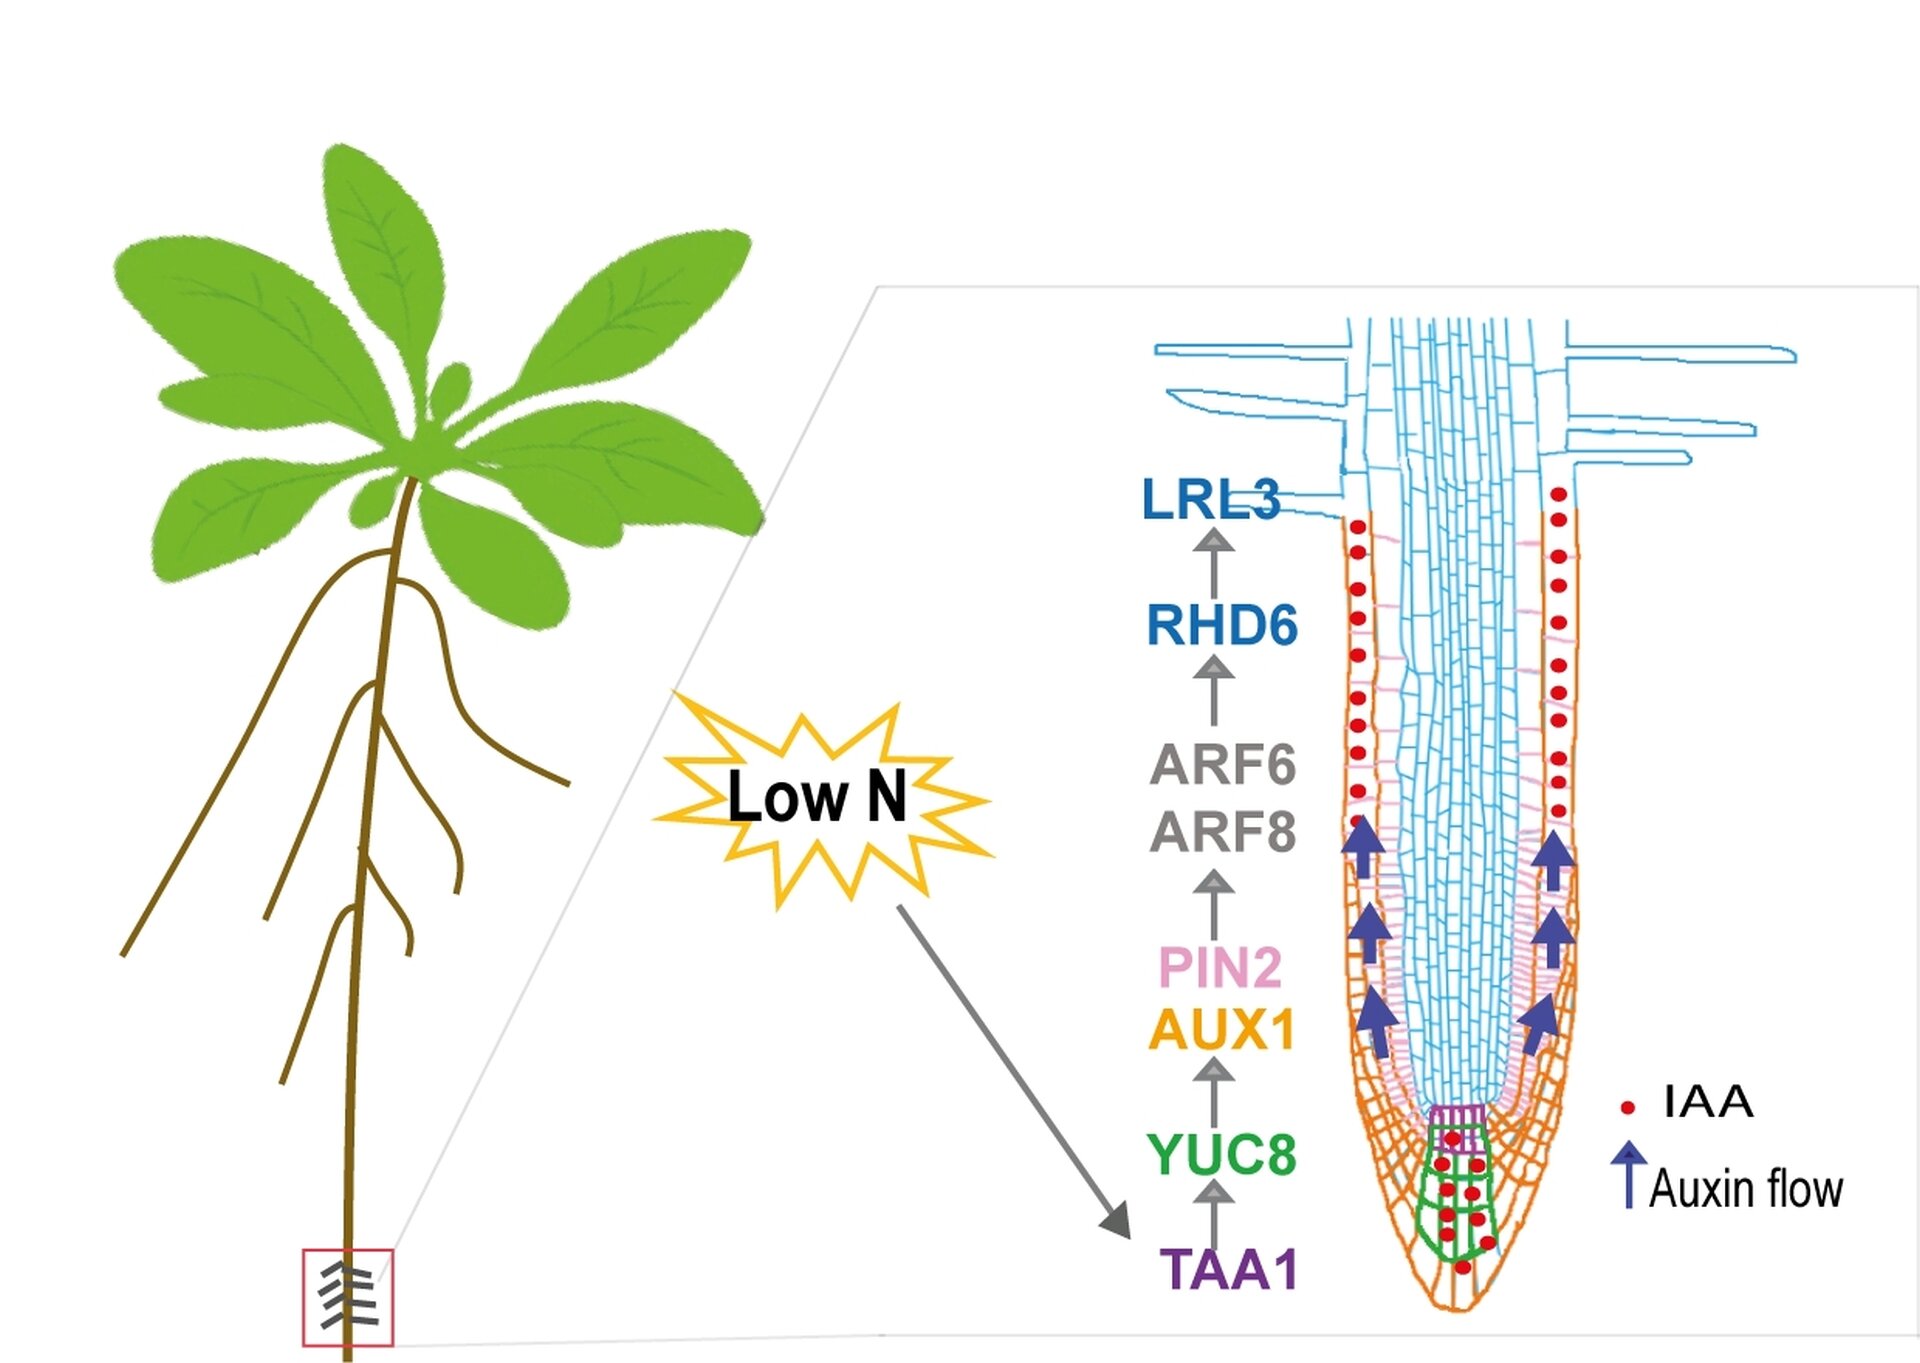 Study shows auxin signaling pathway controls root hair formation for nitrogen uptake